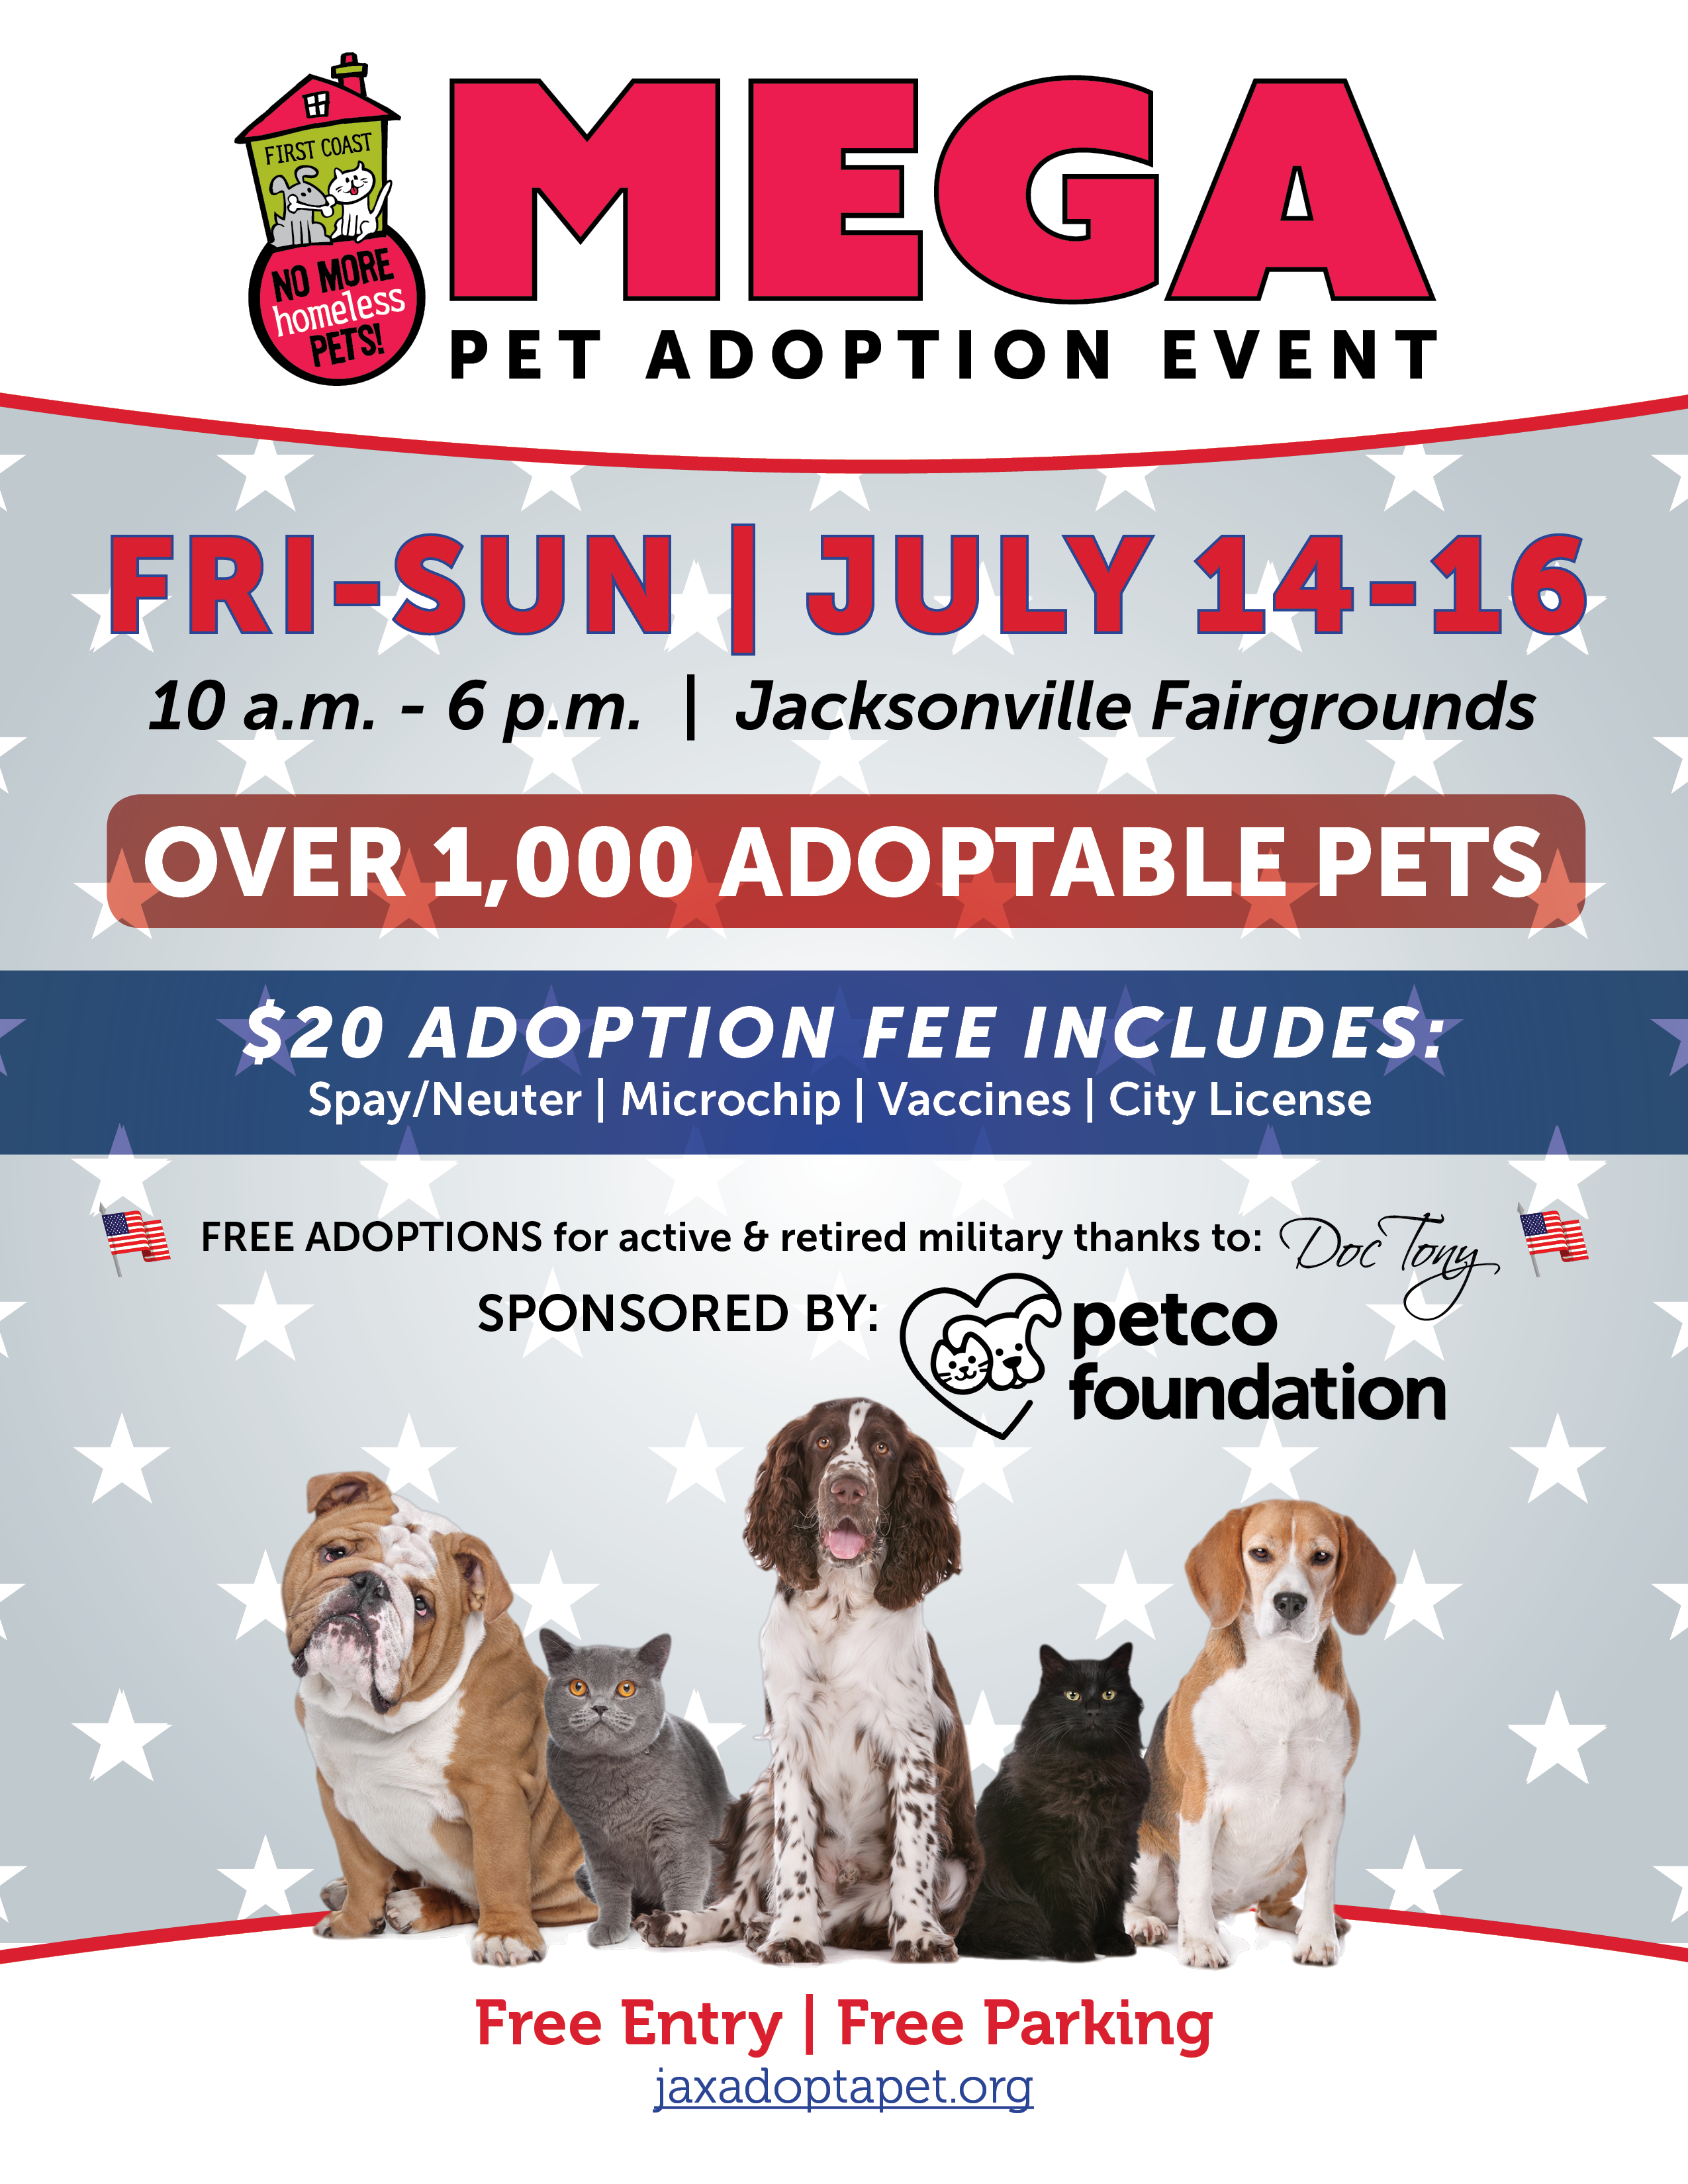 puppy adoption events near me this weekend